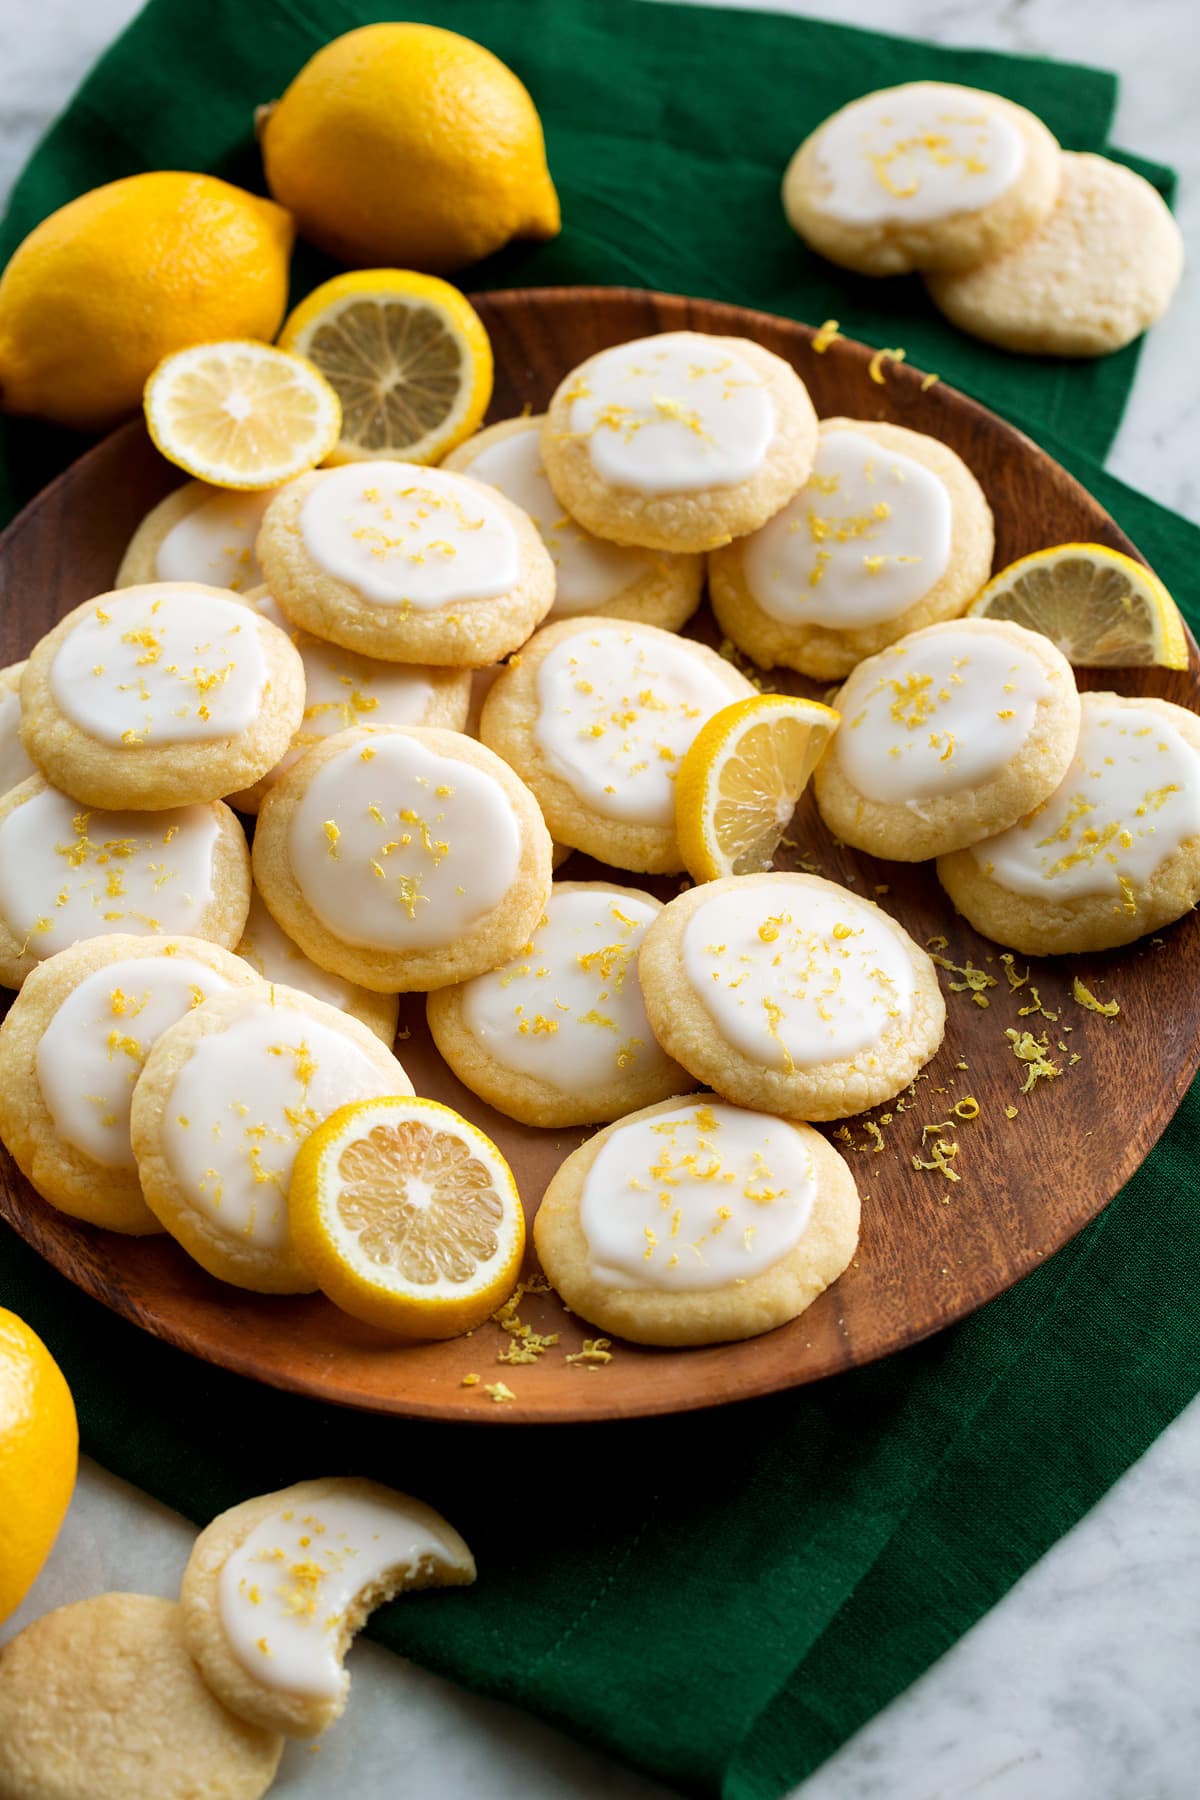 Lemon meltaway cookies shown on a wooden plate over a green cloth on a marble surface with lemons for decoration.